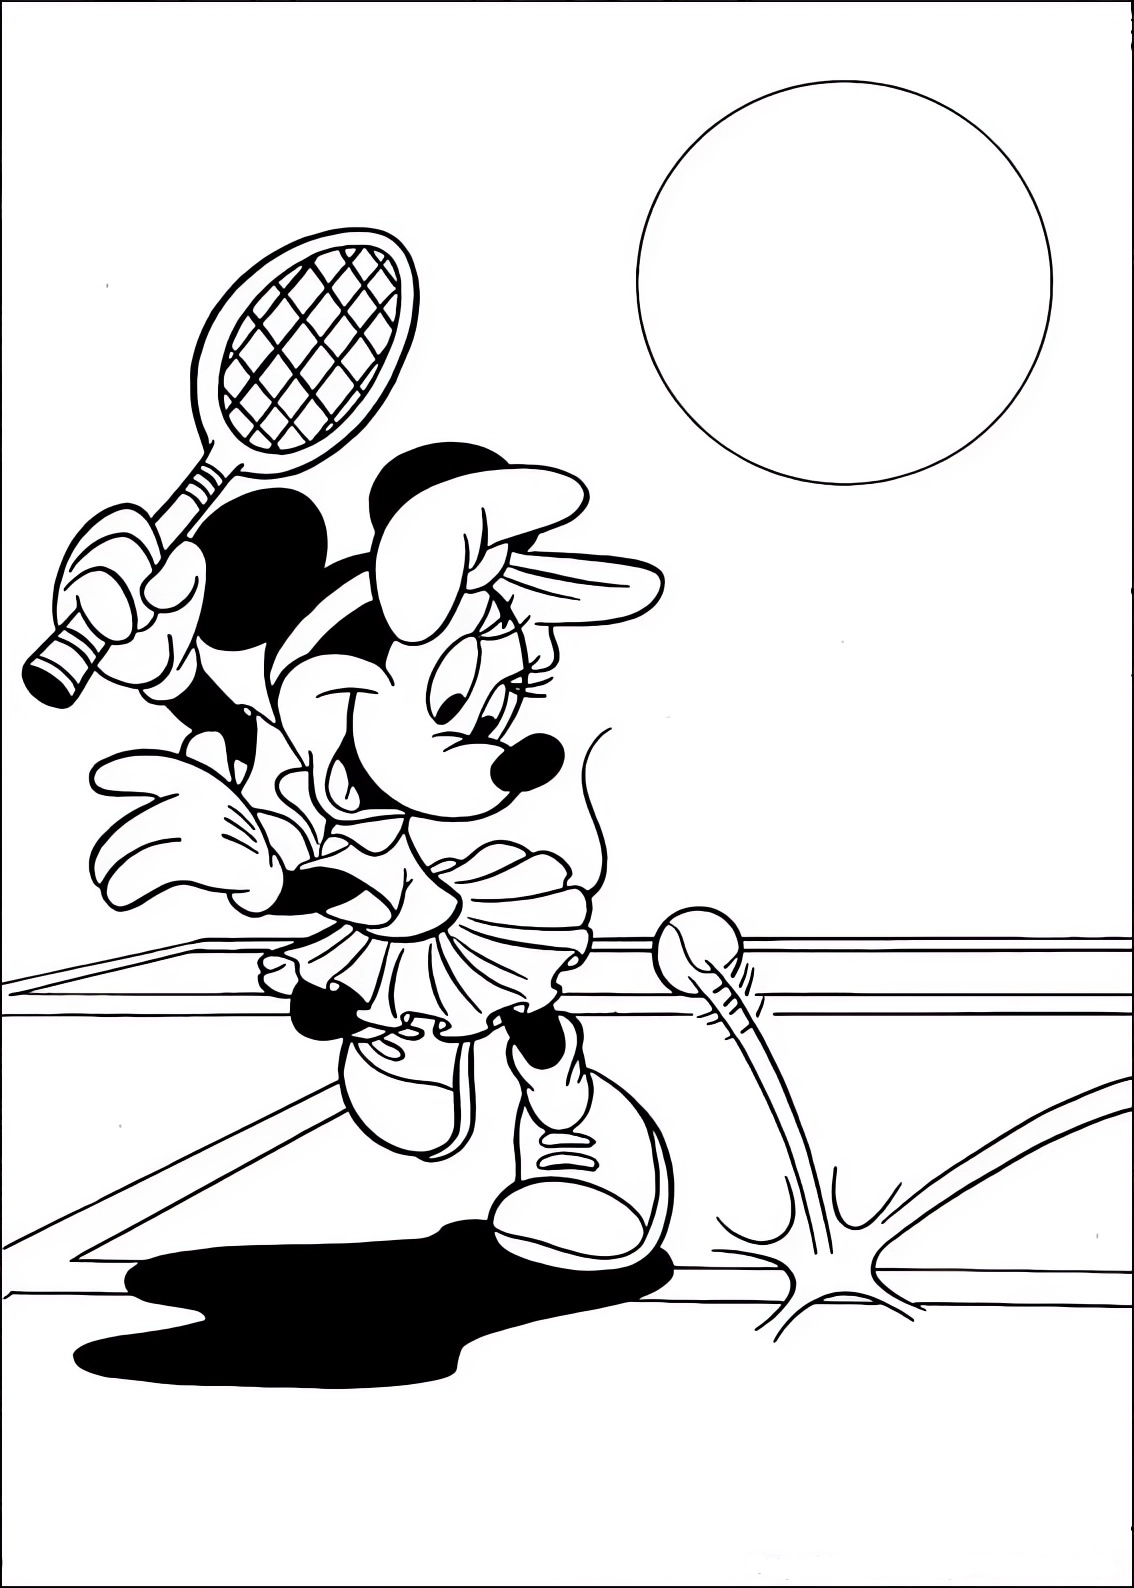 Coloring page of Minnie Mouse playing tennis